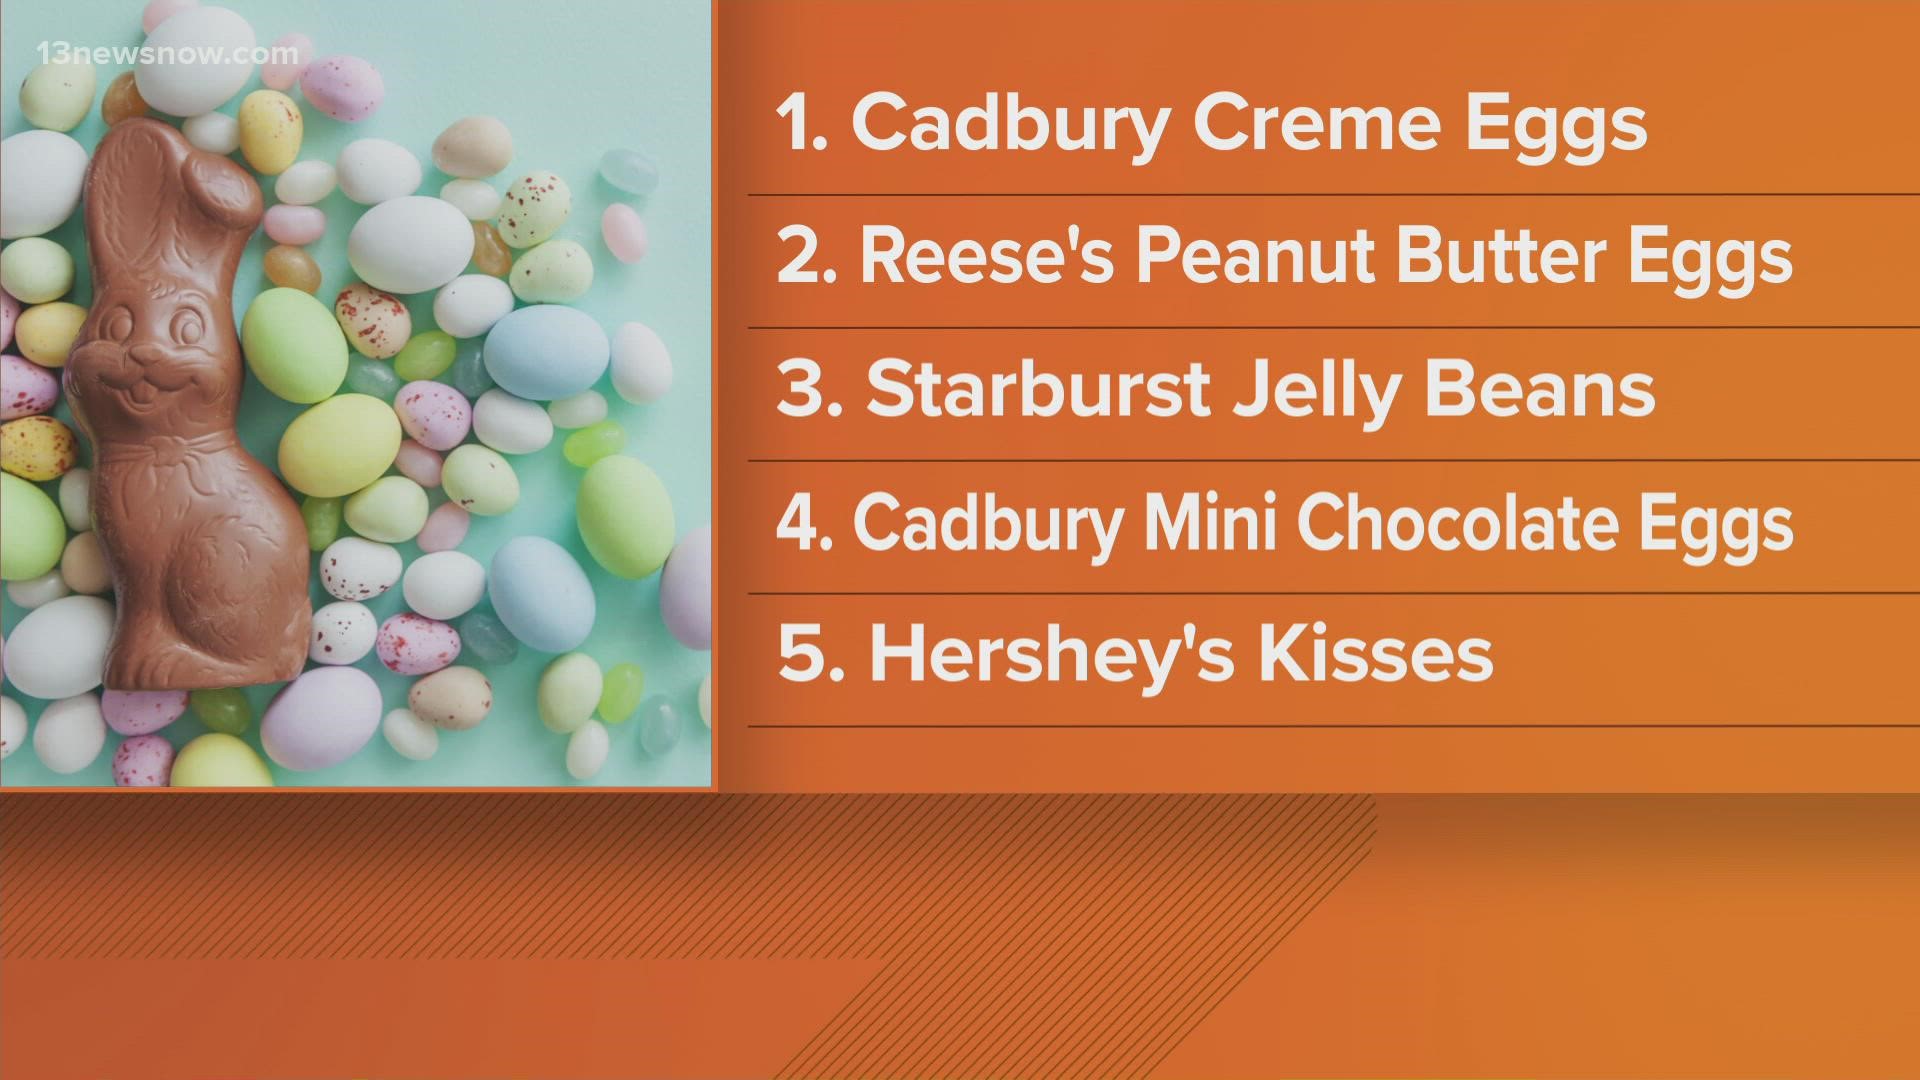 Instacart conducted a survey to find out Americans' favorite Easter treat. Here's what they found!